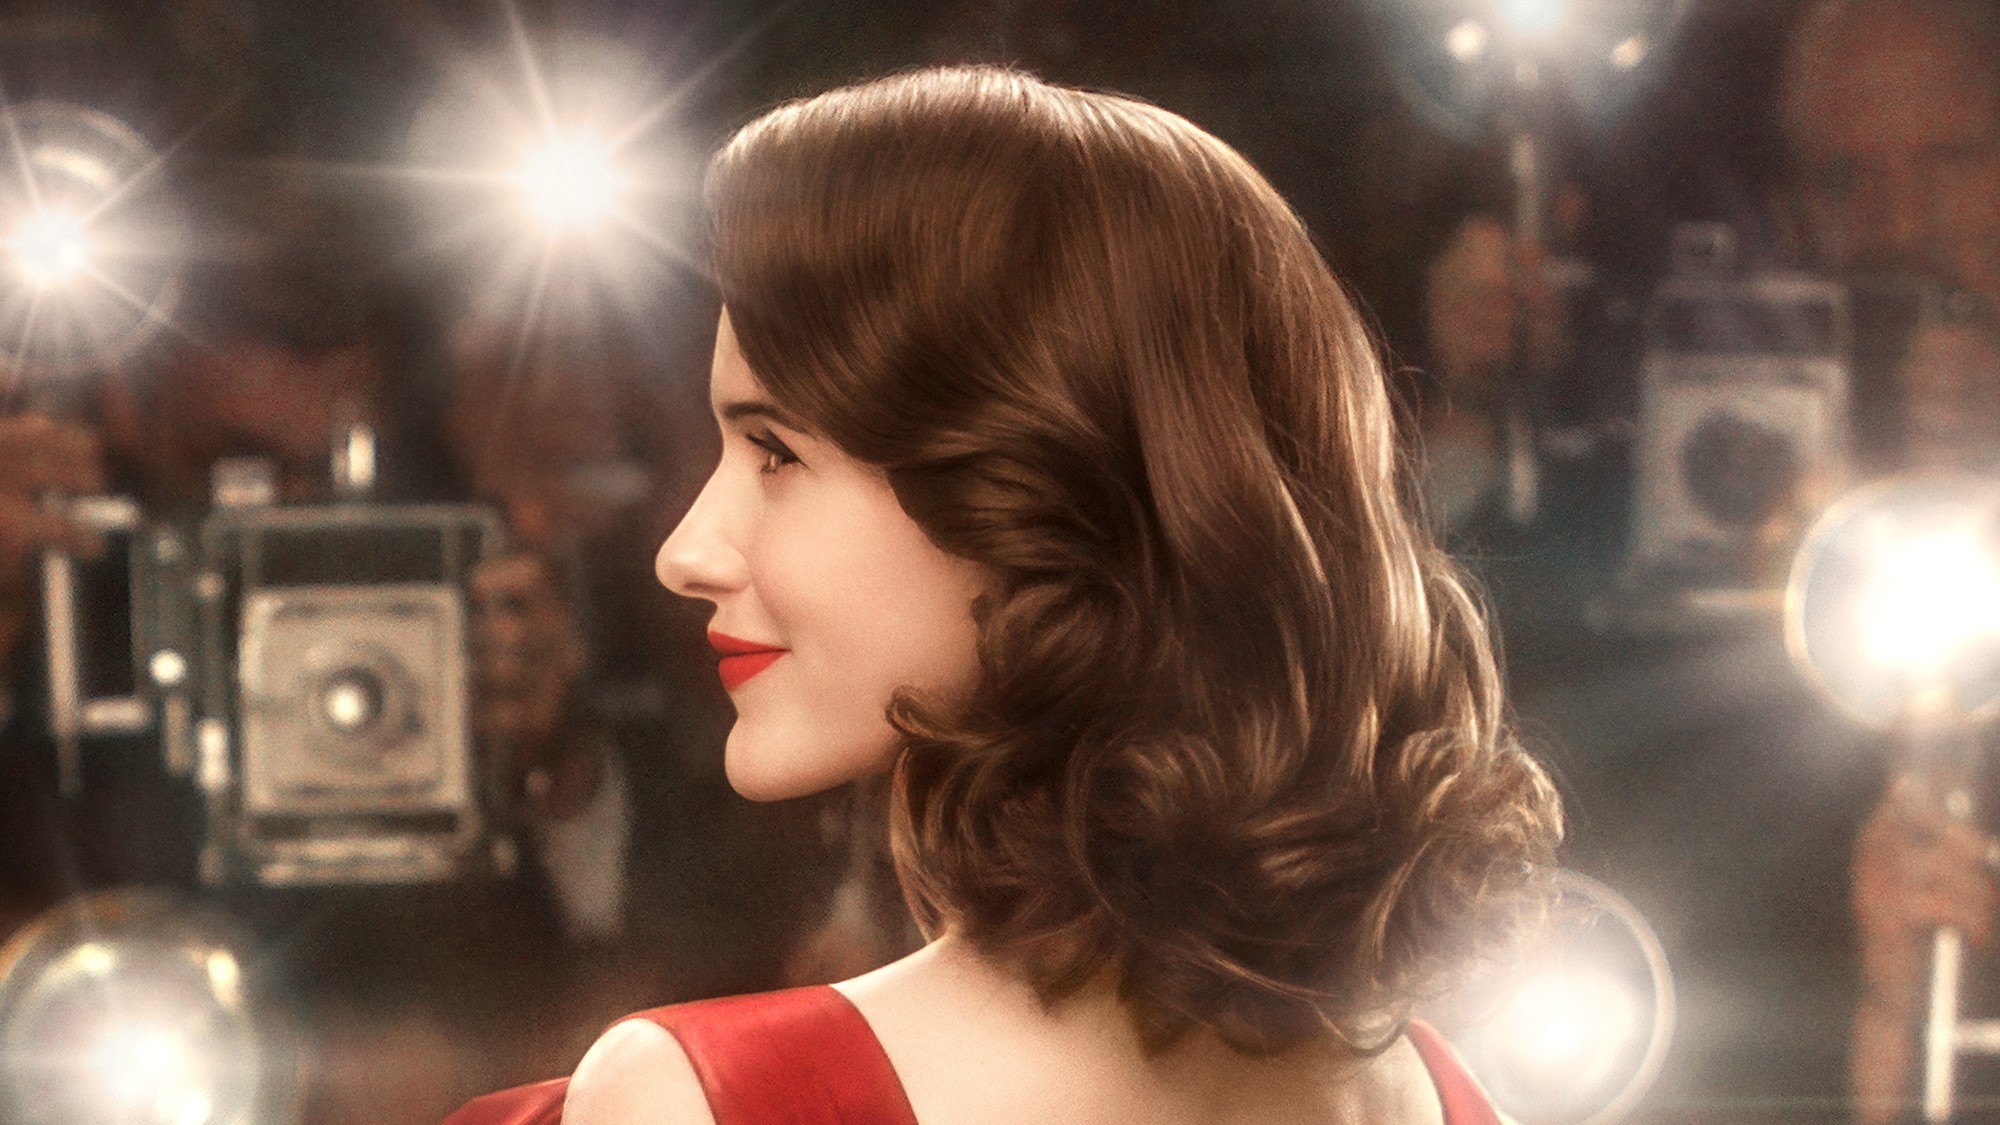 The Marvelous Mrs. Maisel season 5 next episode and recaps What to Watch